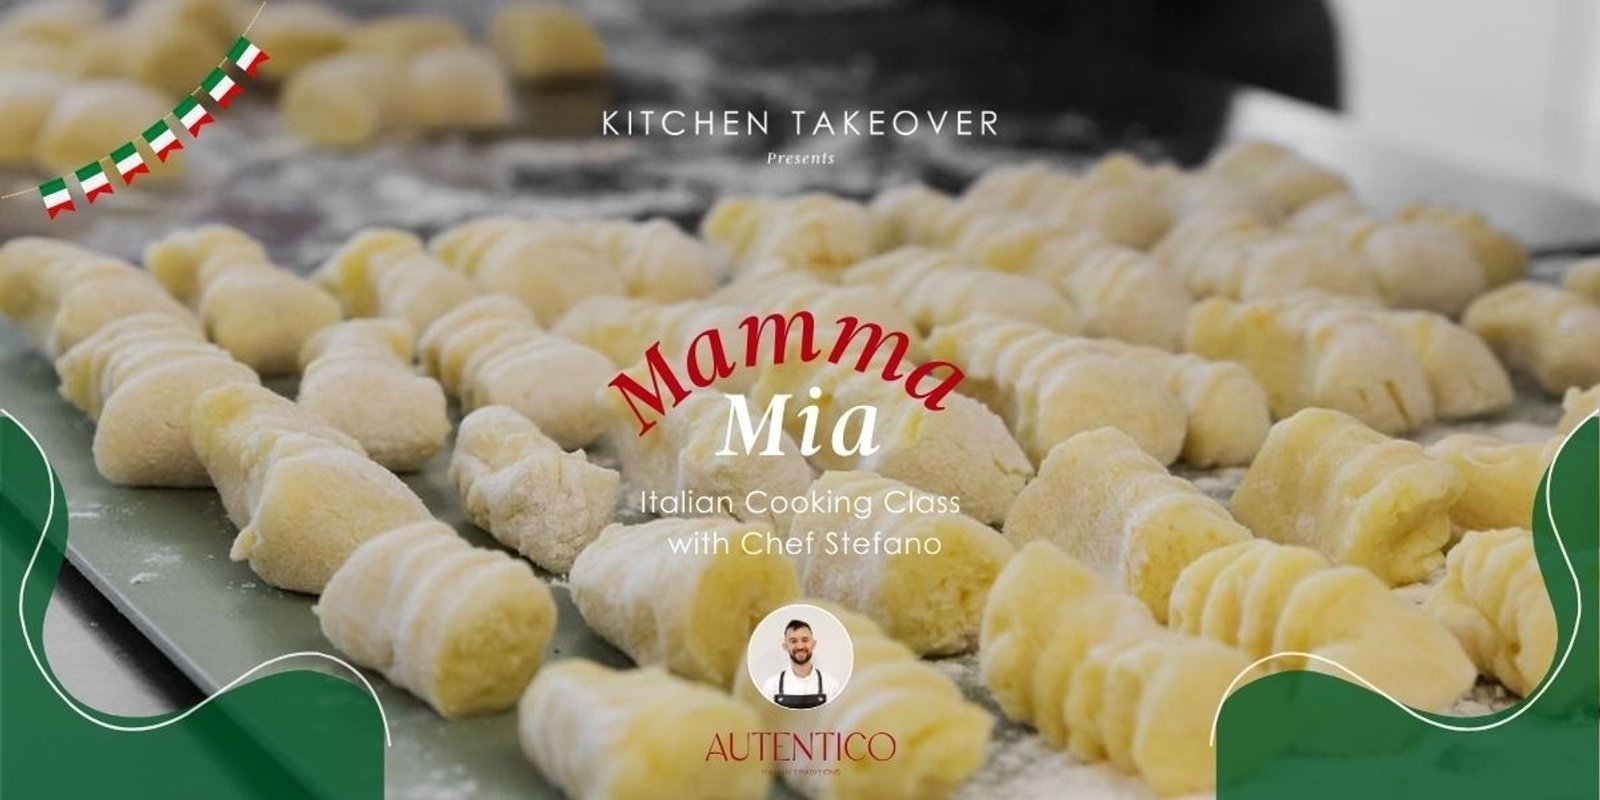 Banner image for Kitchen Takeover Presents: Mamma Mia! Italian Cooking Class with Autentico Cooking